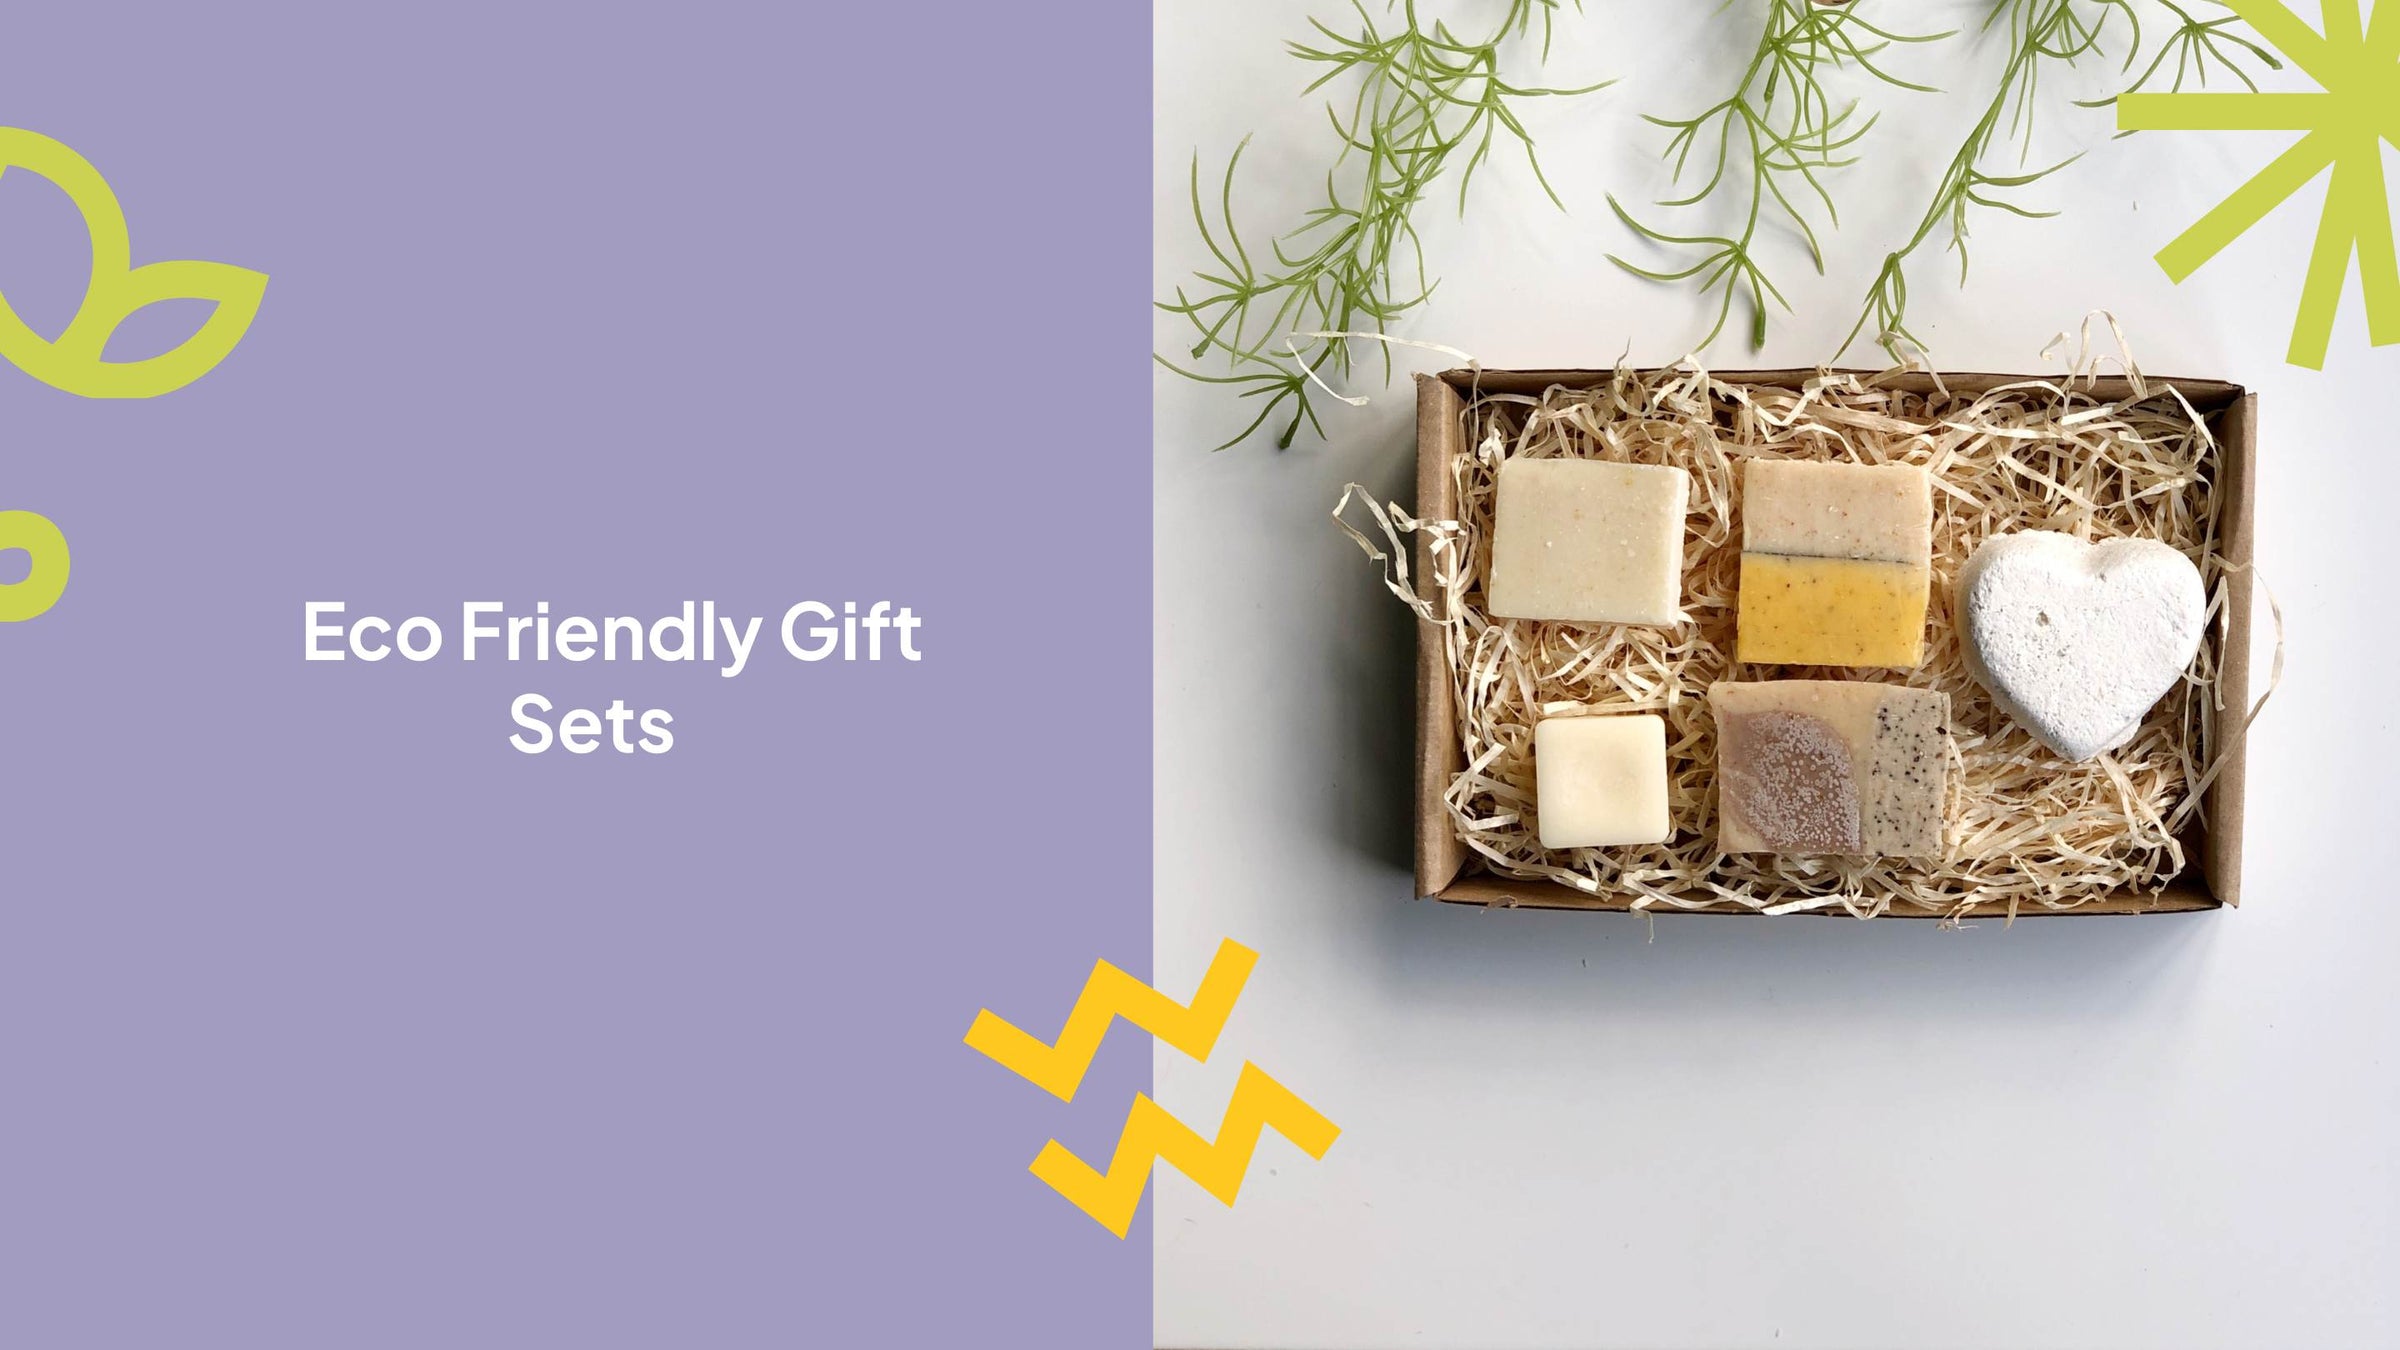 eco friendly gift sets by smallkind 